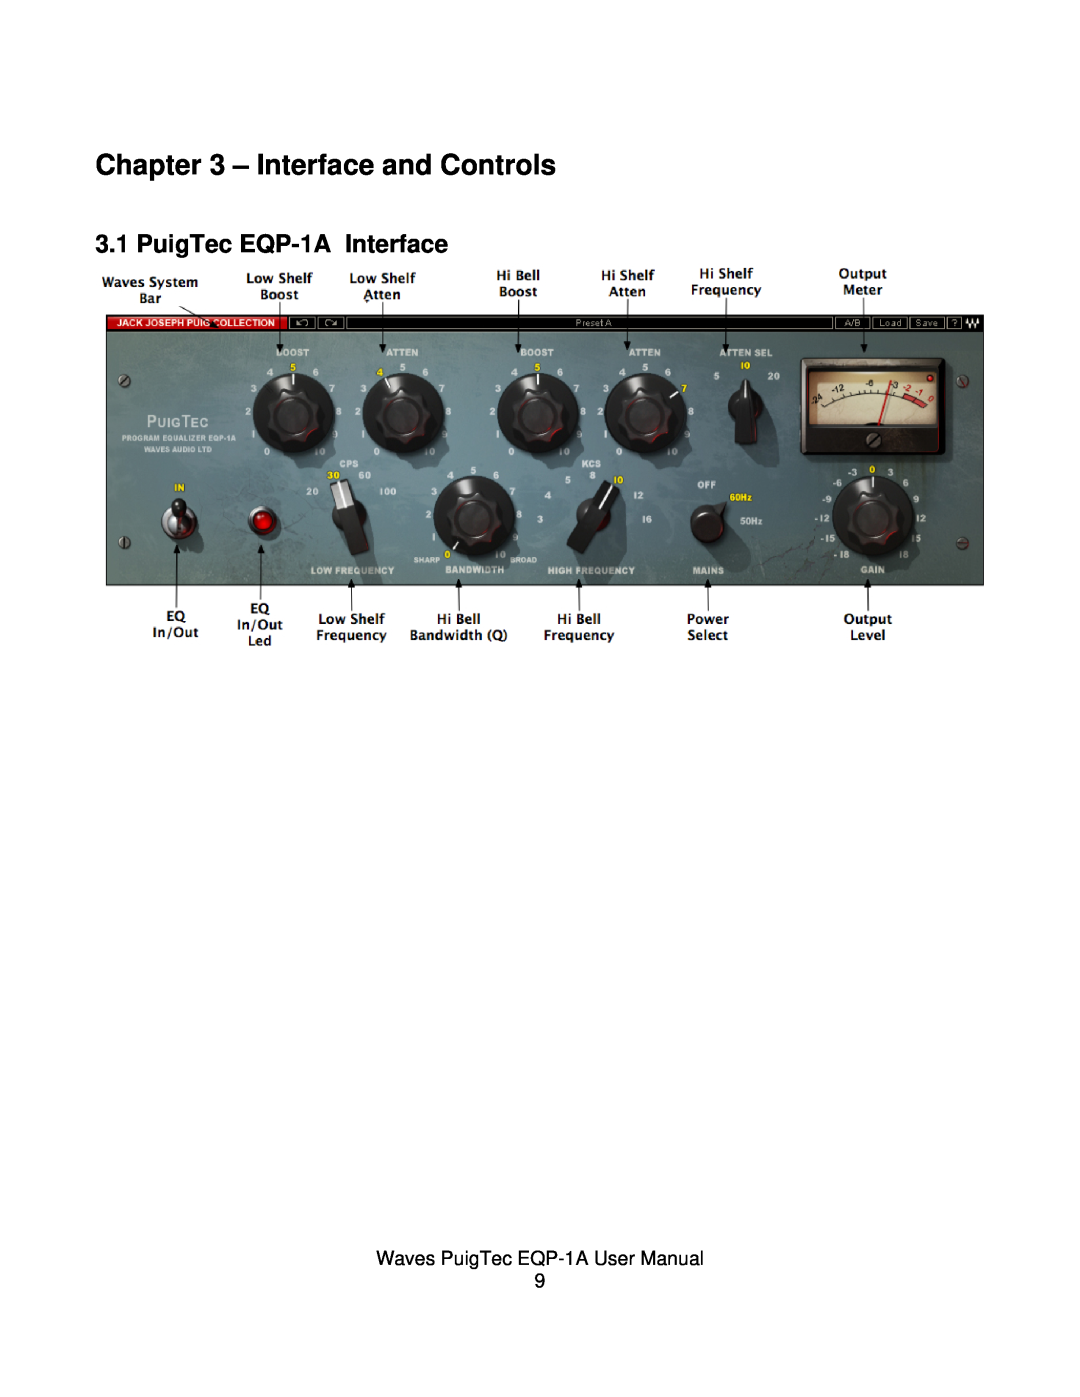 Waves user manual Interface and Controls, PuigTec EQP-1AInterface 